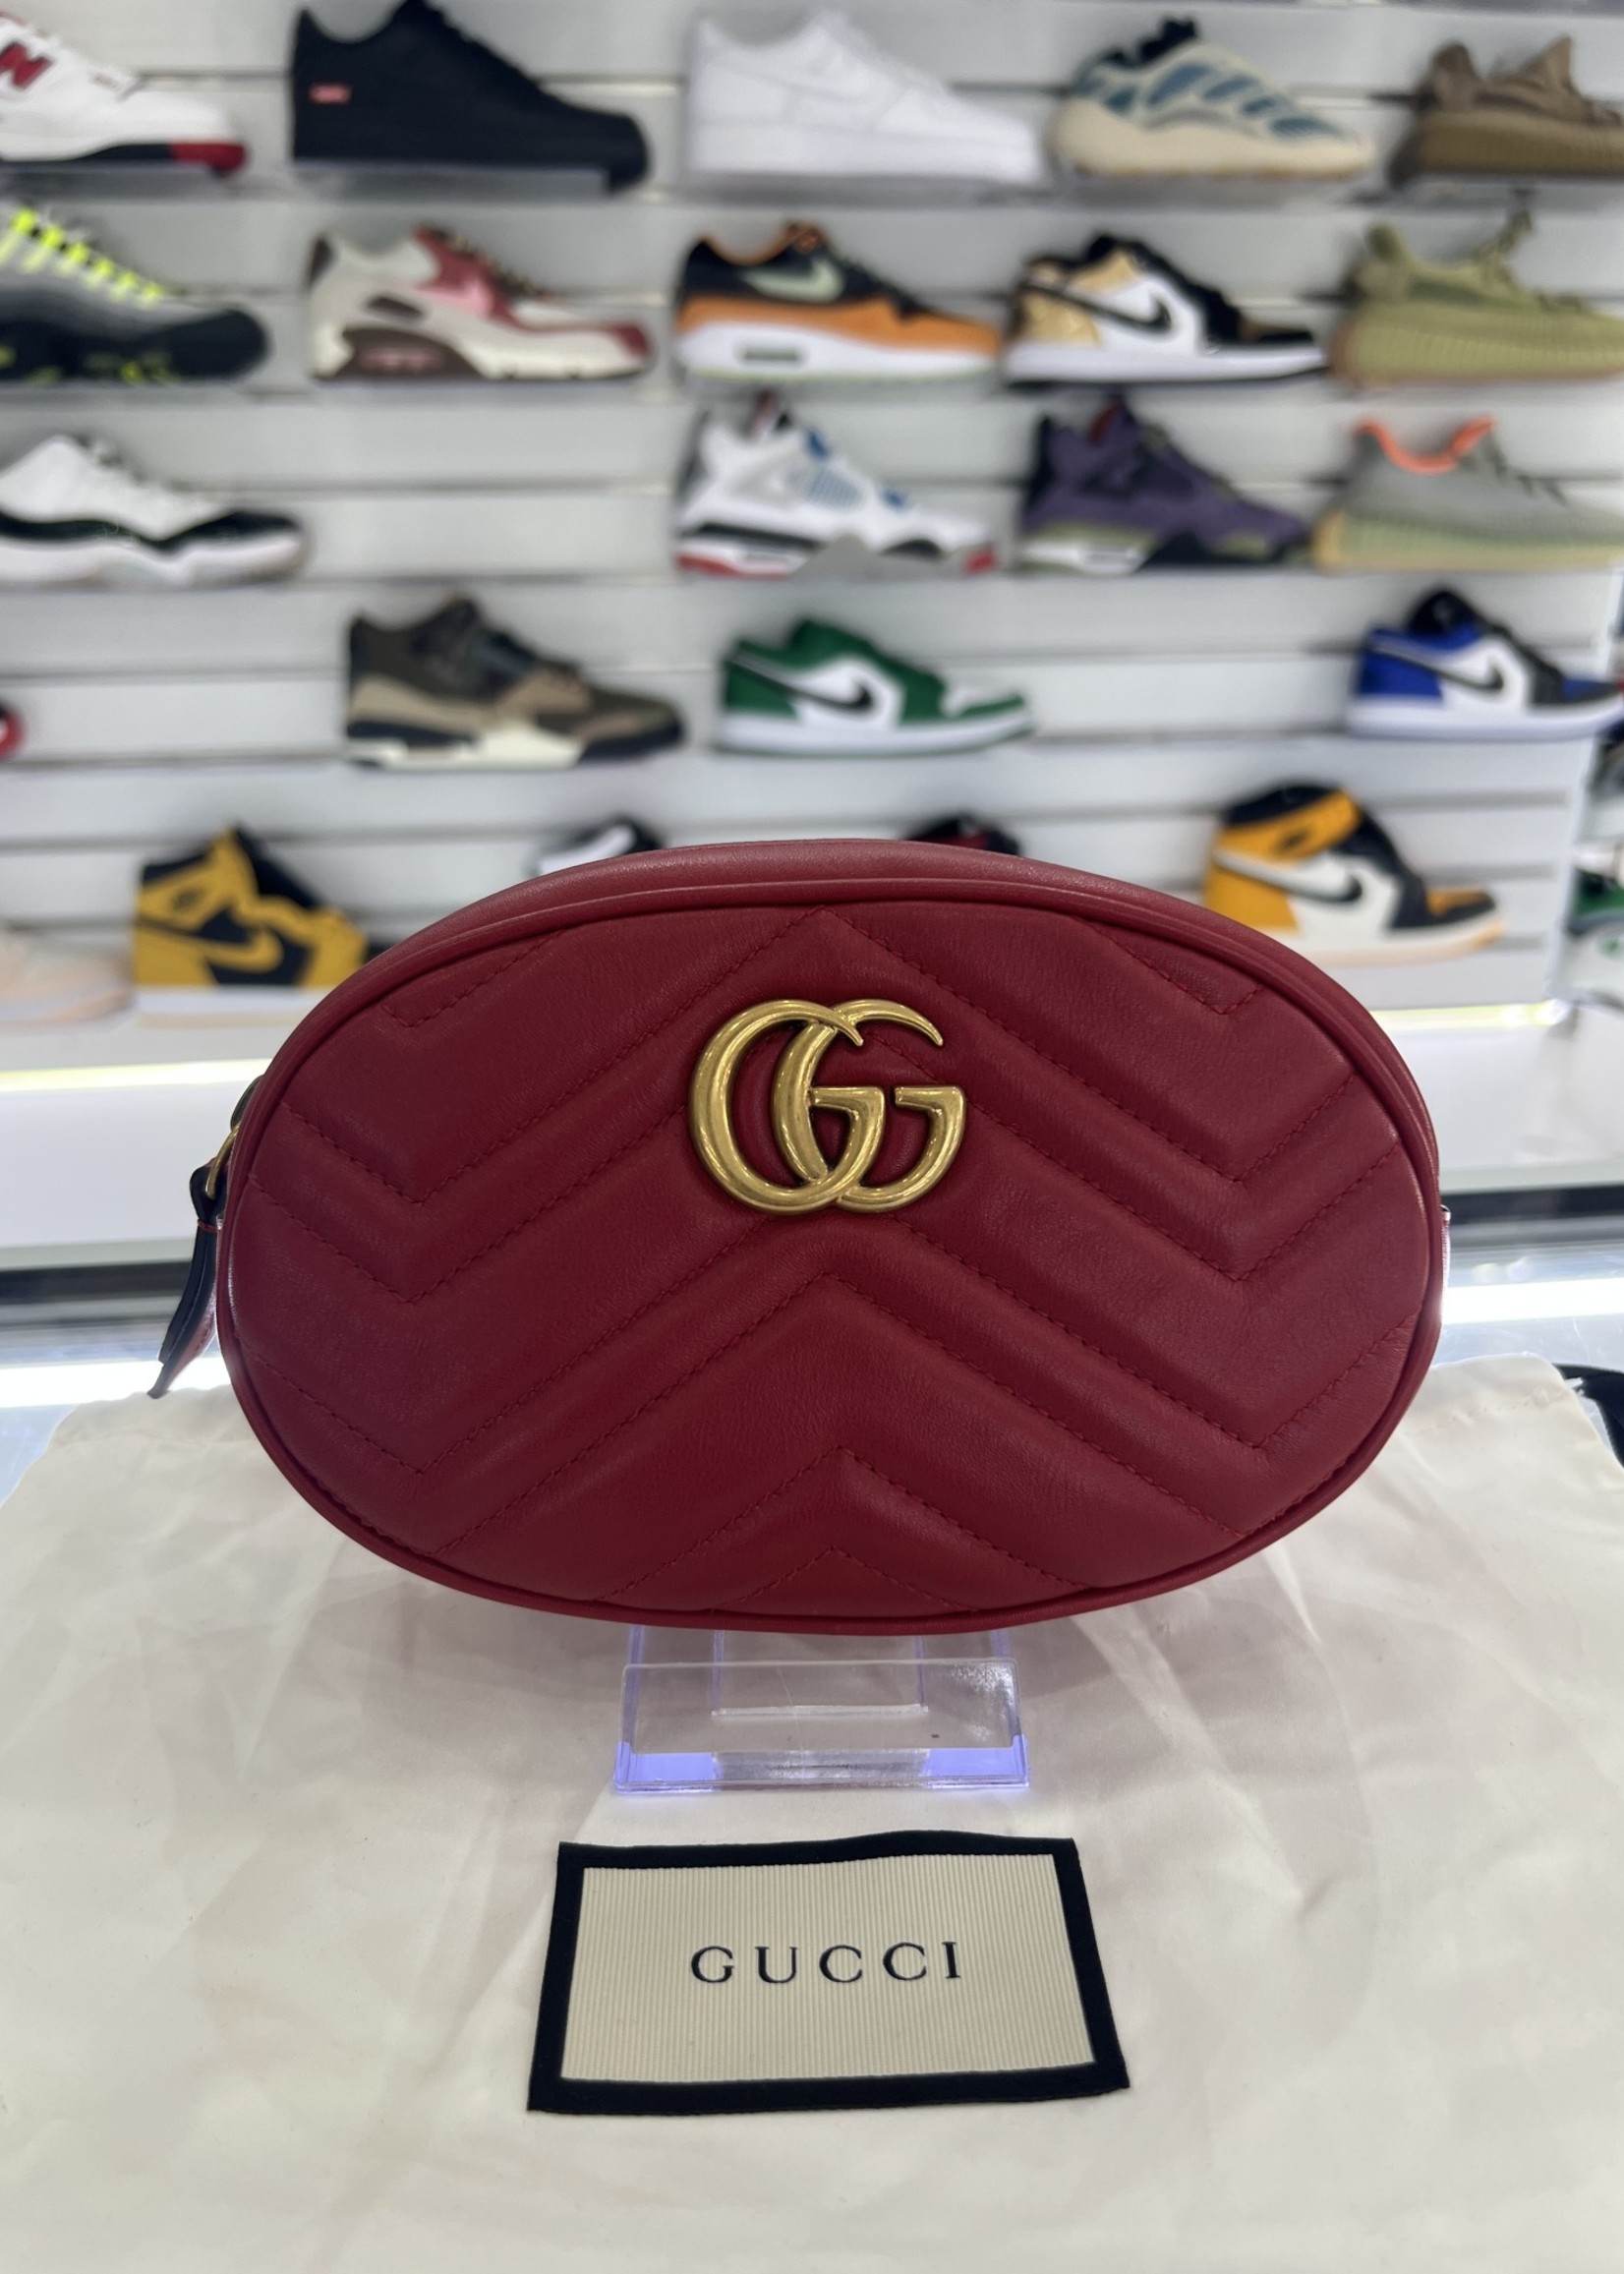 Gucci GUCCI BELT BAG RED LEATHER SIZE 75-30 - NEW